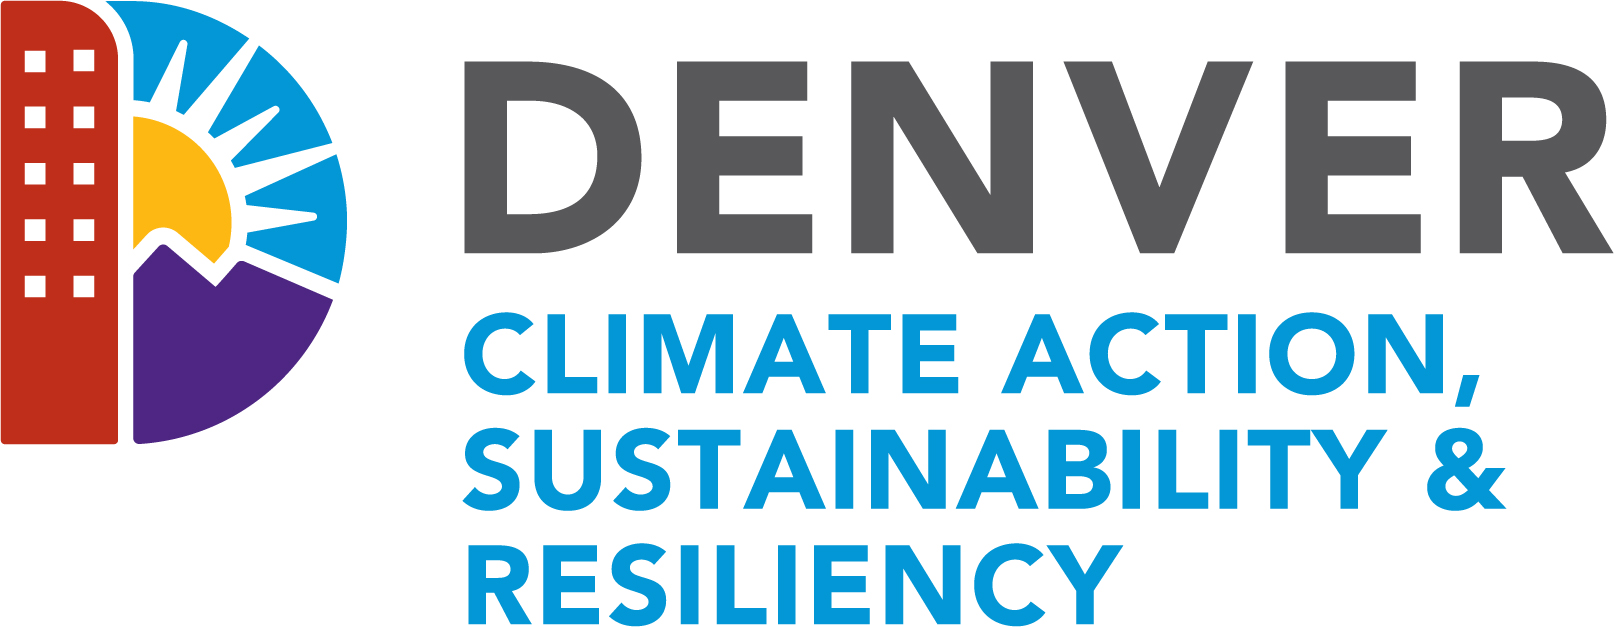 Organization logo of City and County of Denver Climate Action, Sustainability & Resiliency